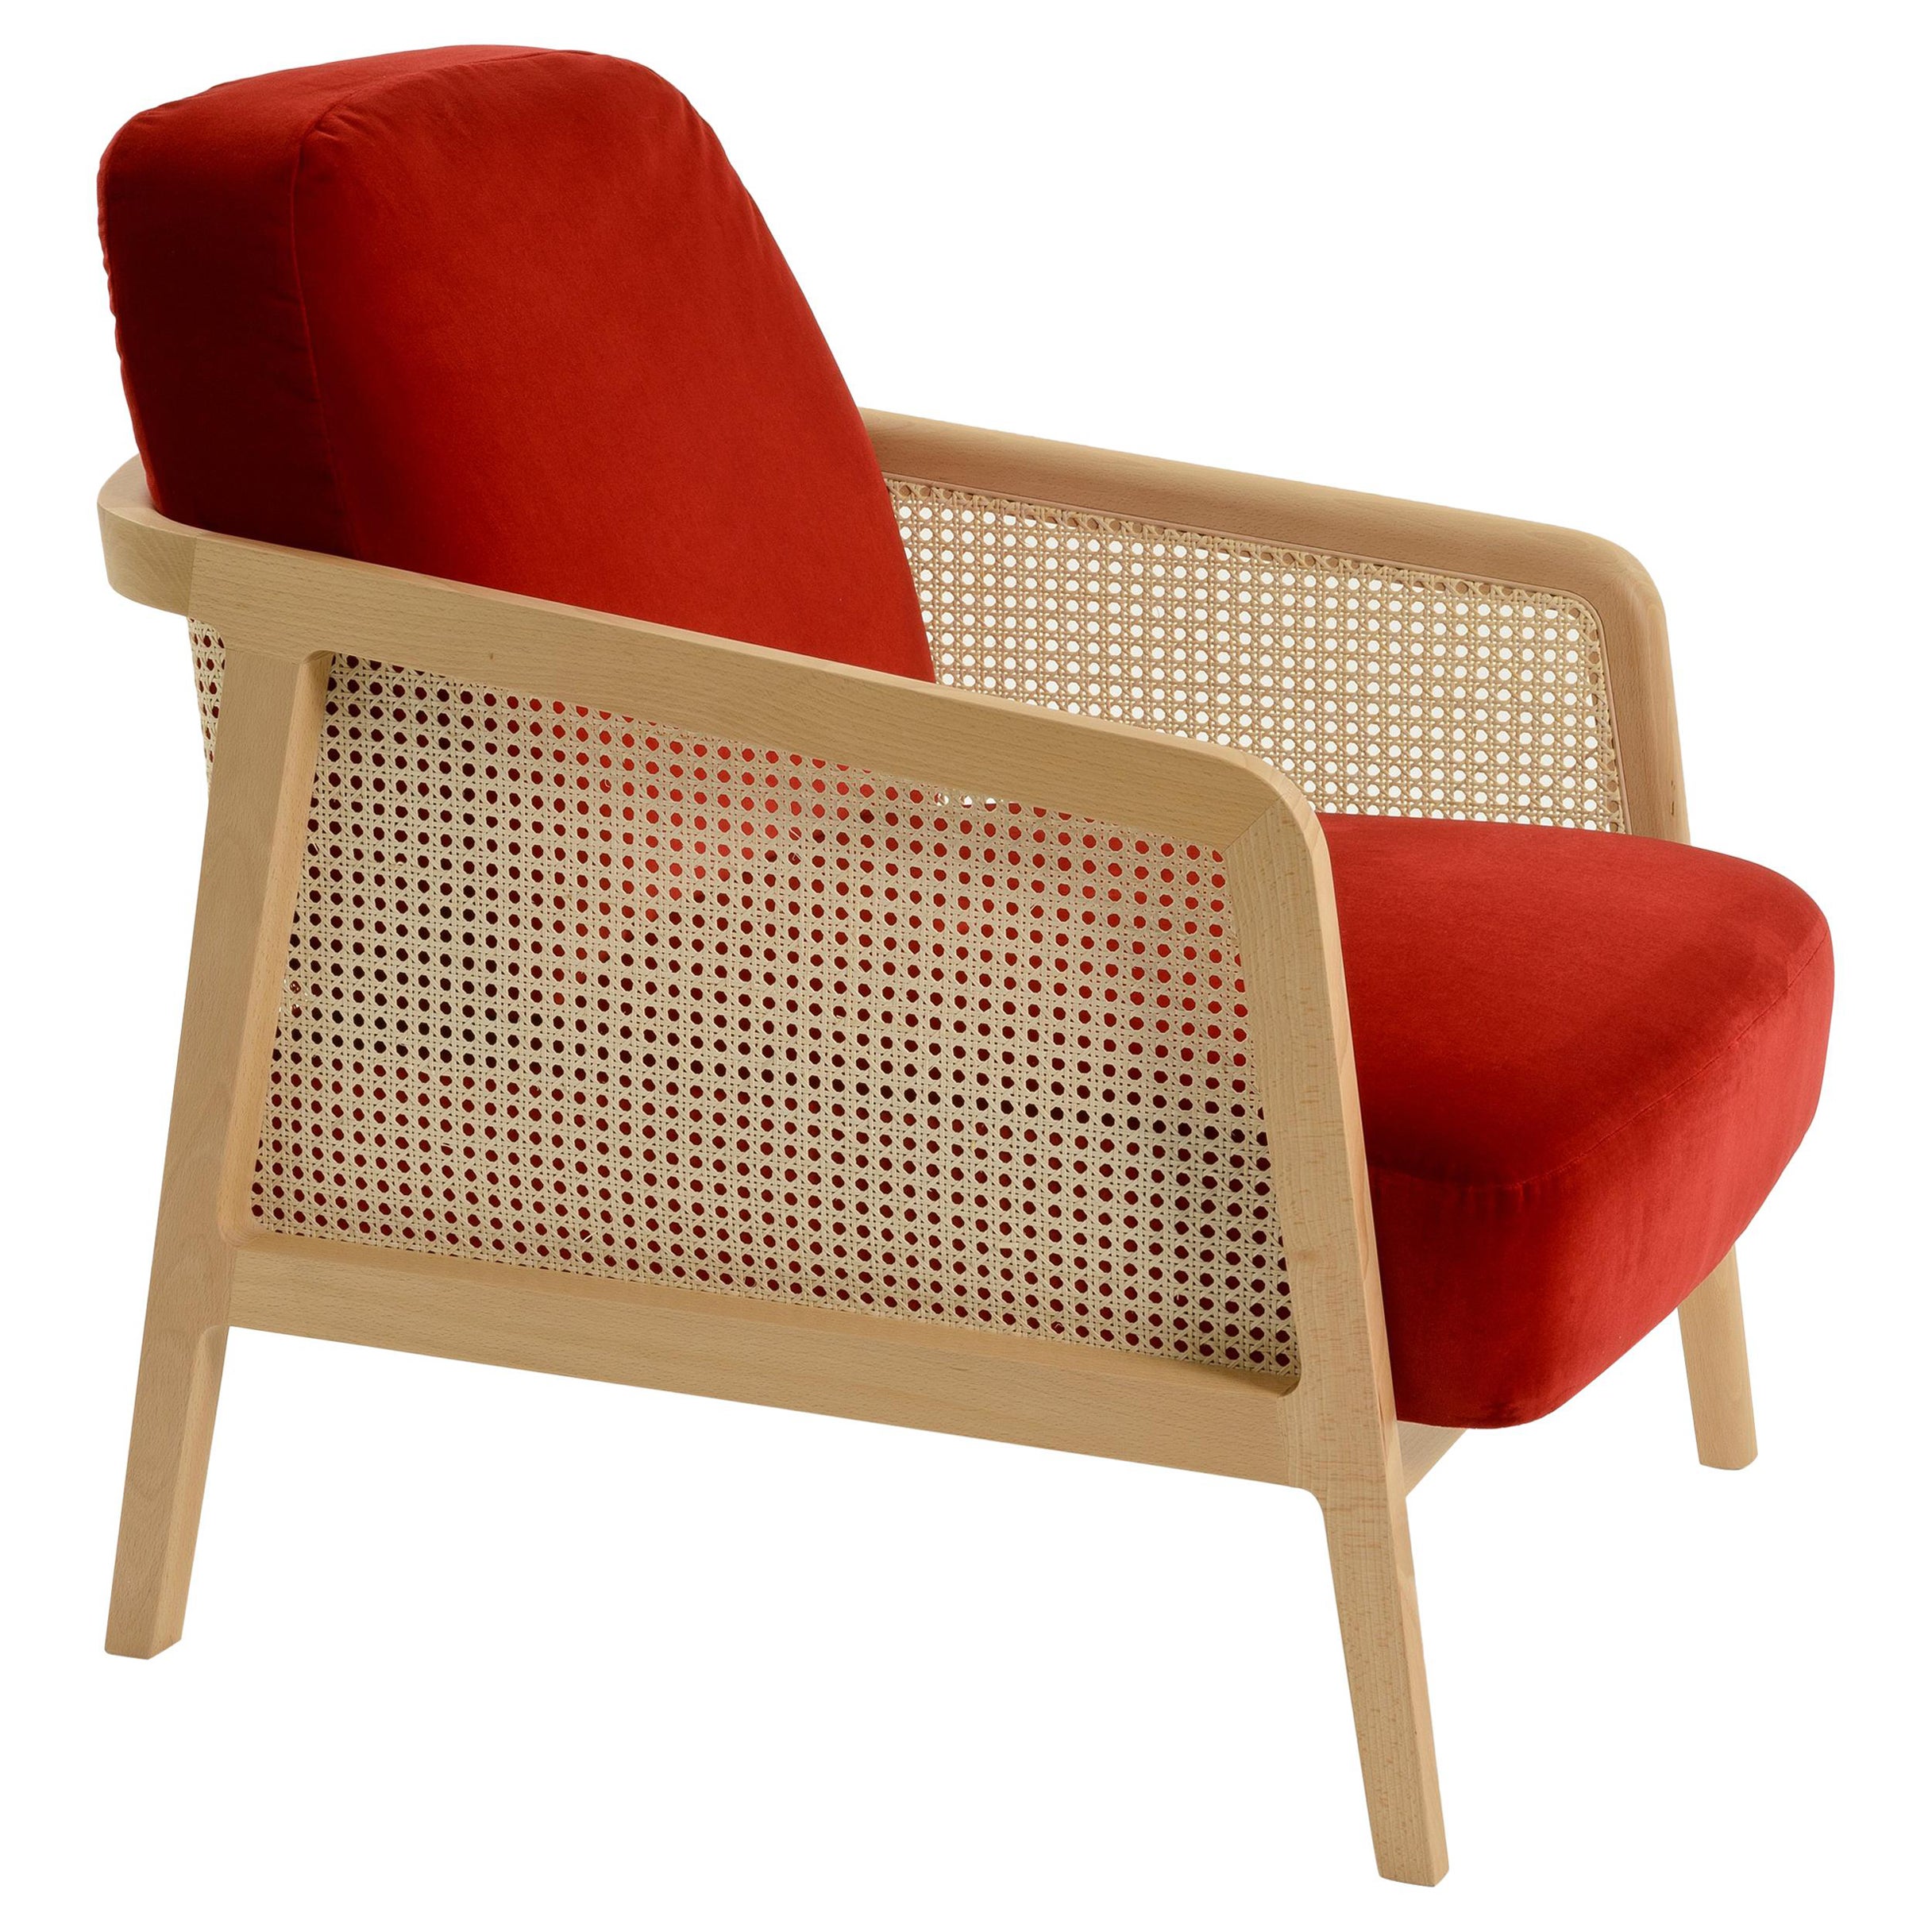 A set of two armchairs in wood and straw, that recalls the exclusive club atmosphere but in a contemporary key. Vienna is an extraordinarily comfortable and elegant armchair for the living room, designed by Emmanuel Gallina who loves to quote